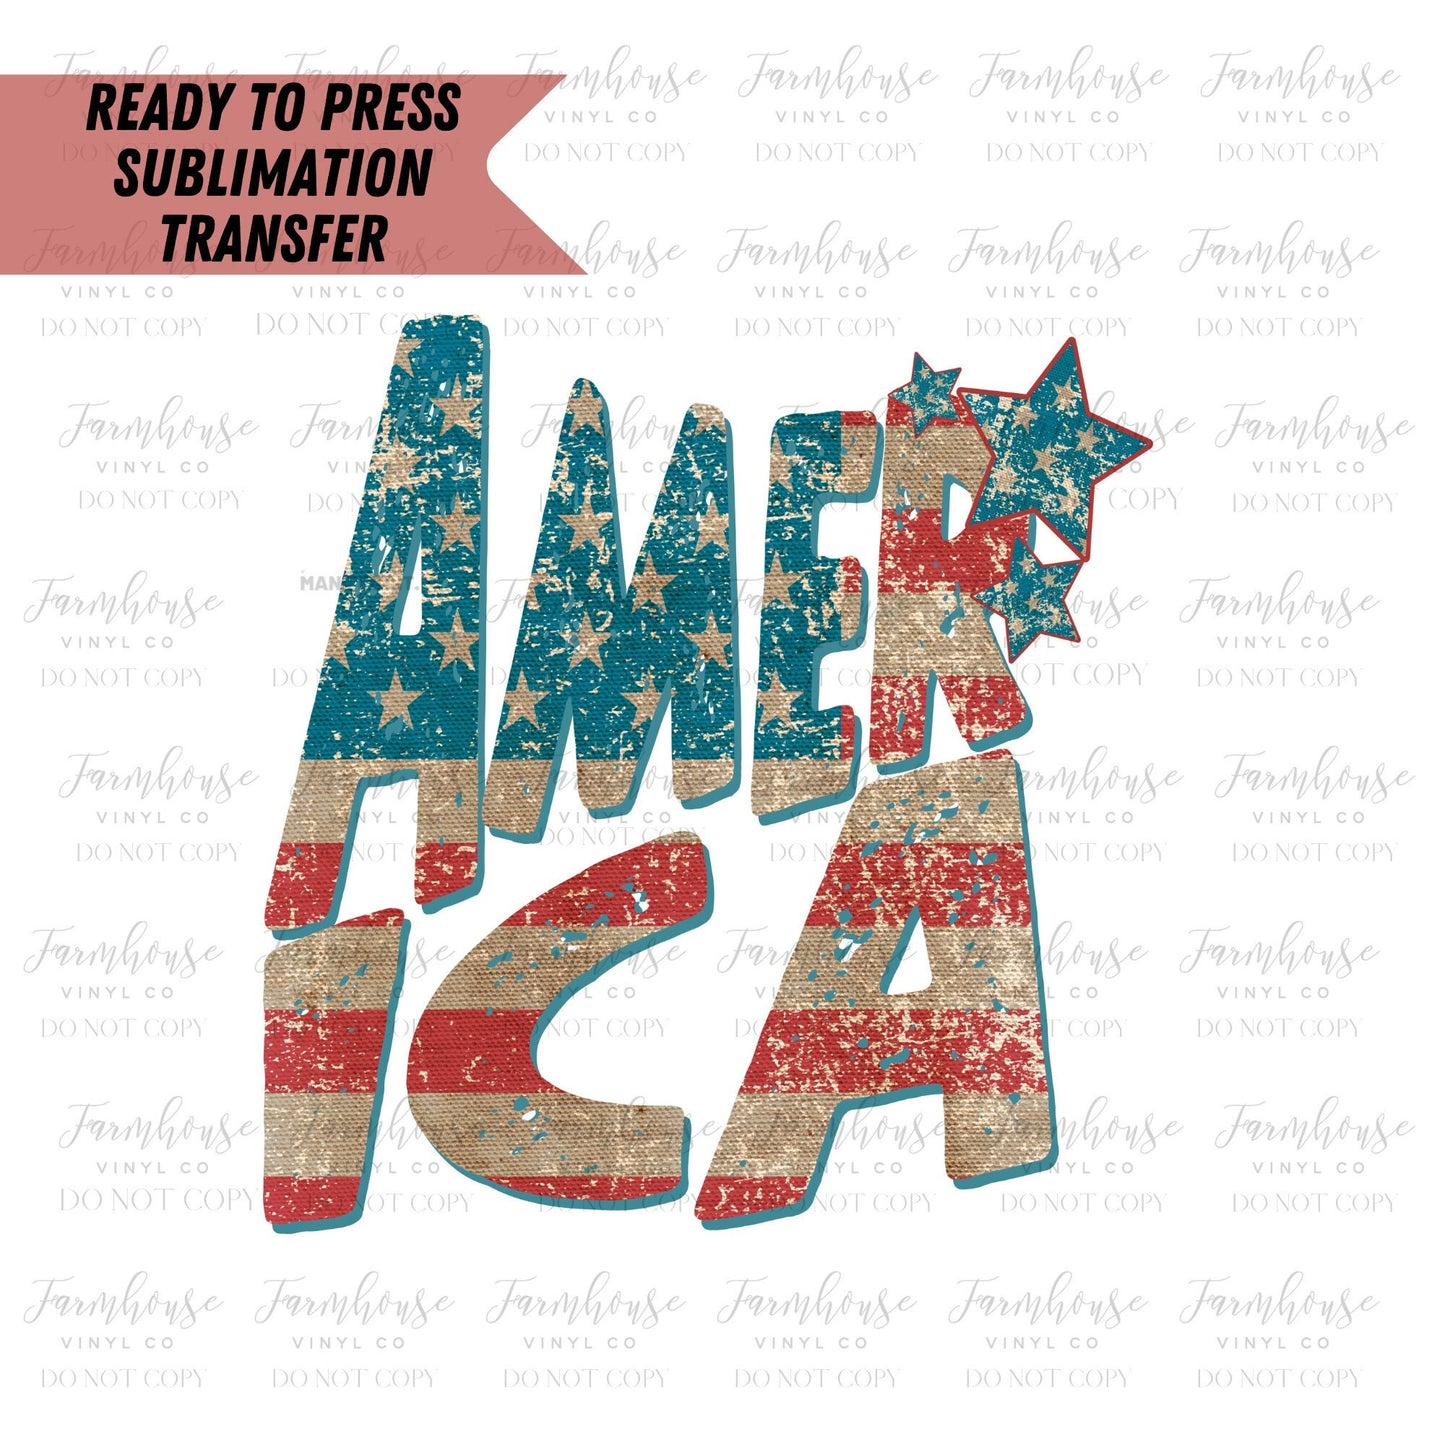 America Distressed Burlap Flag with Stars Drop Shadow Ready To Press Sublimation Transfer - Farmhouse Vinyl Co